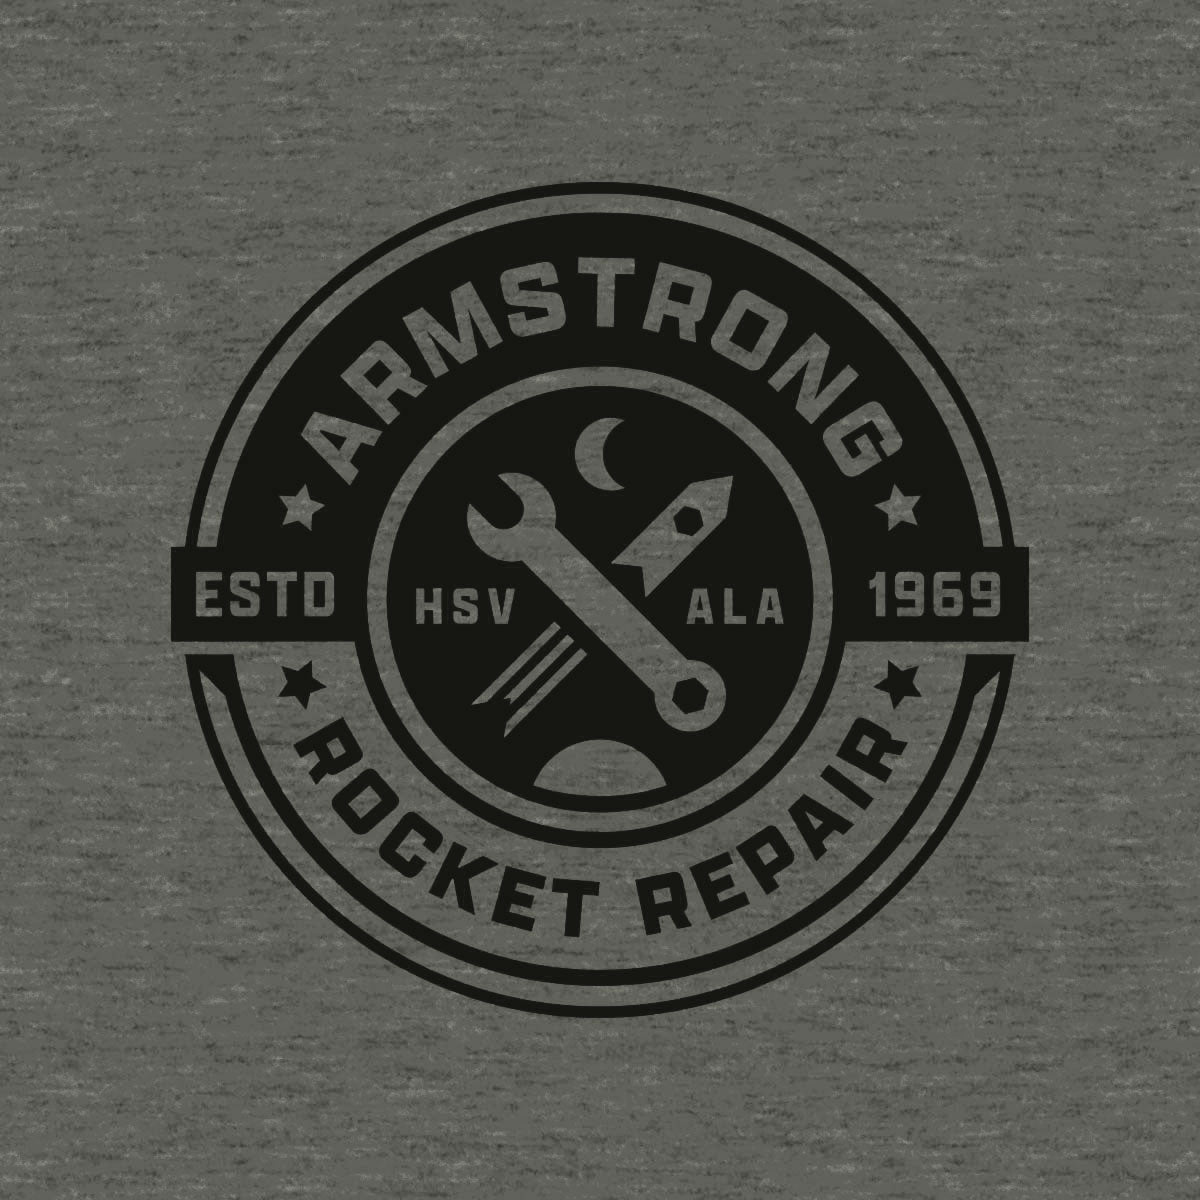 Thumbnail of a seal with the text "armstrong rocket repair" on a green background